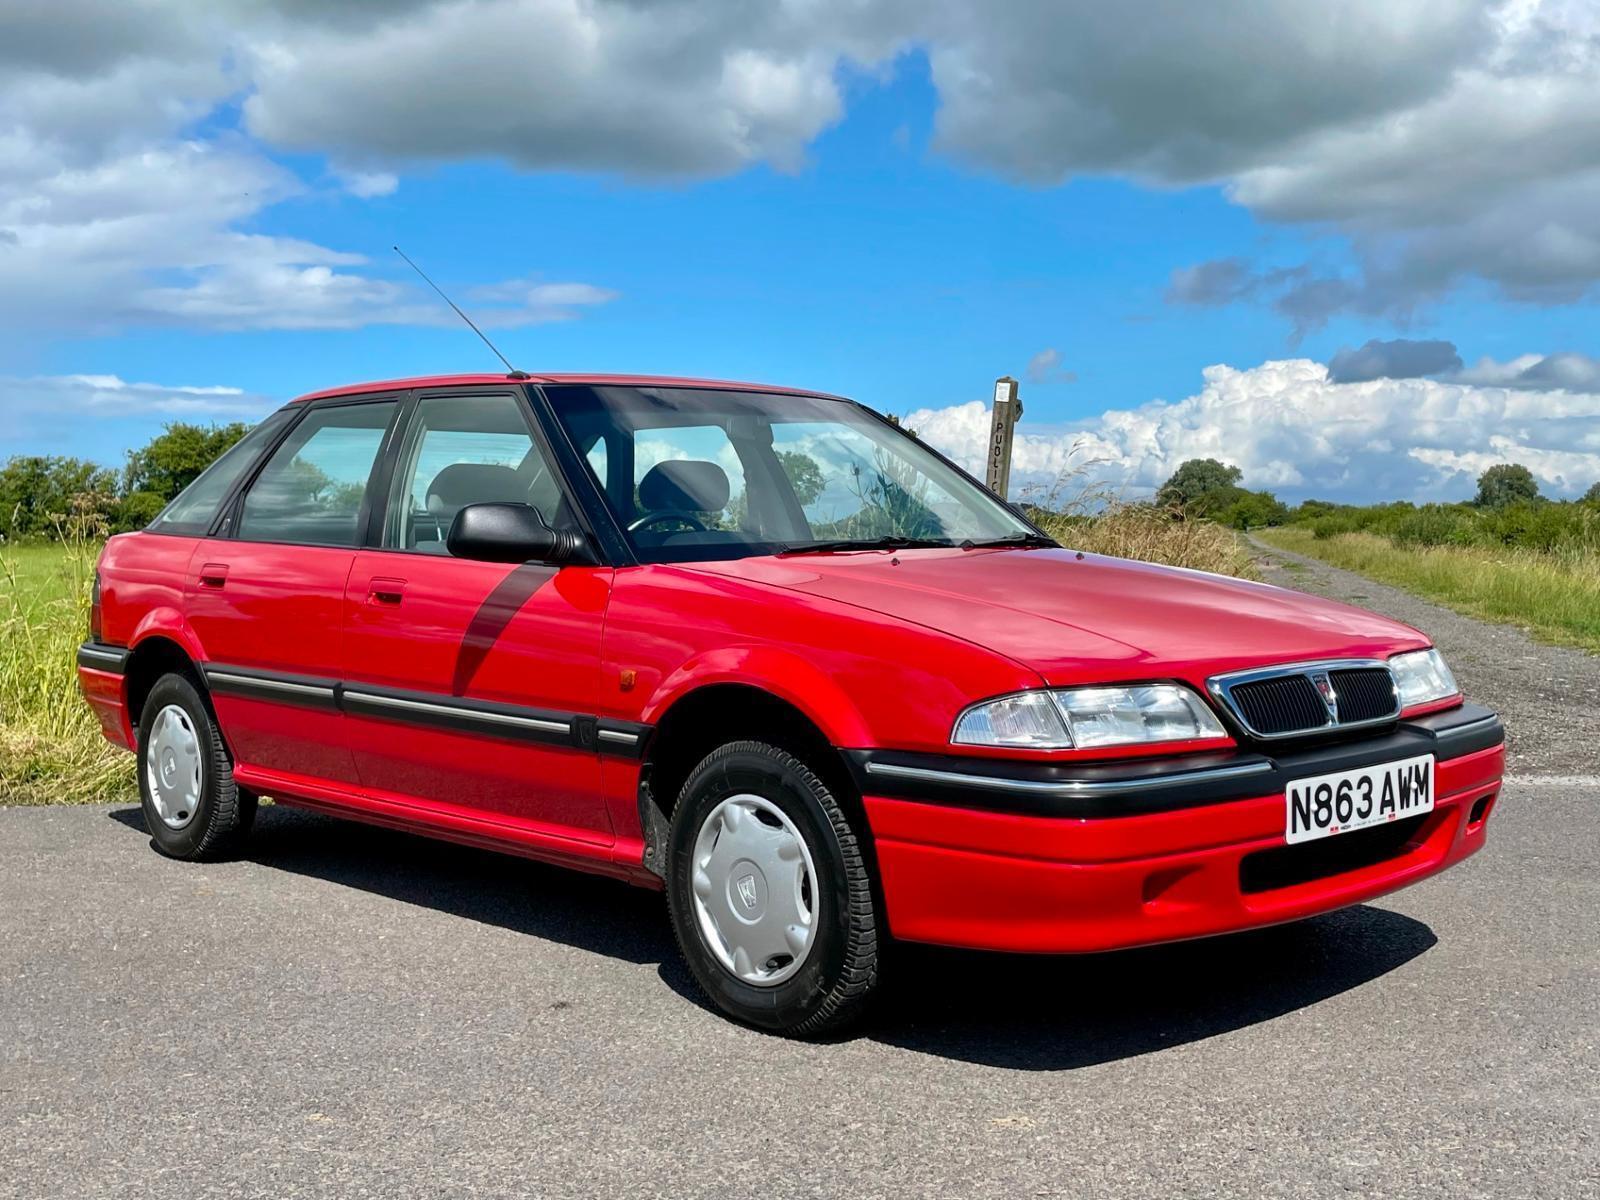 Unexceptional Classifieds: 1800-mile Rover 214